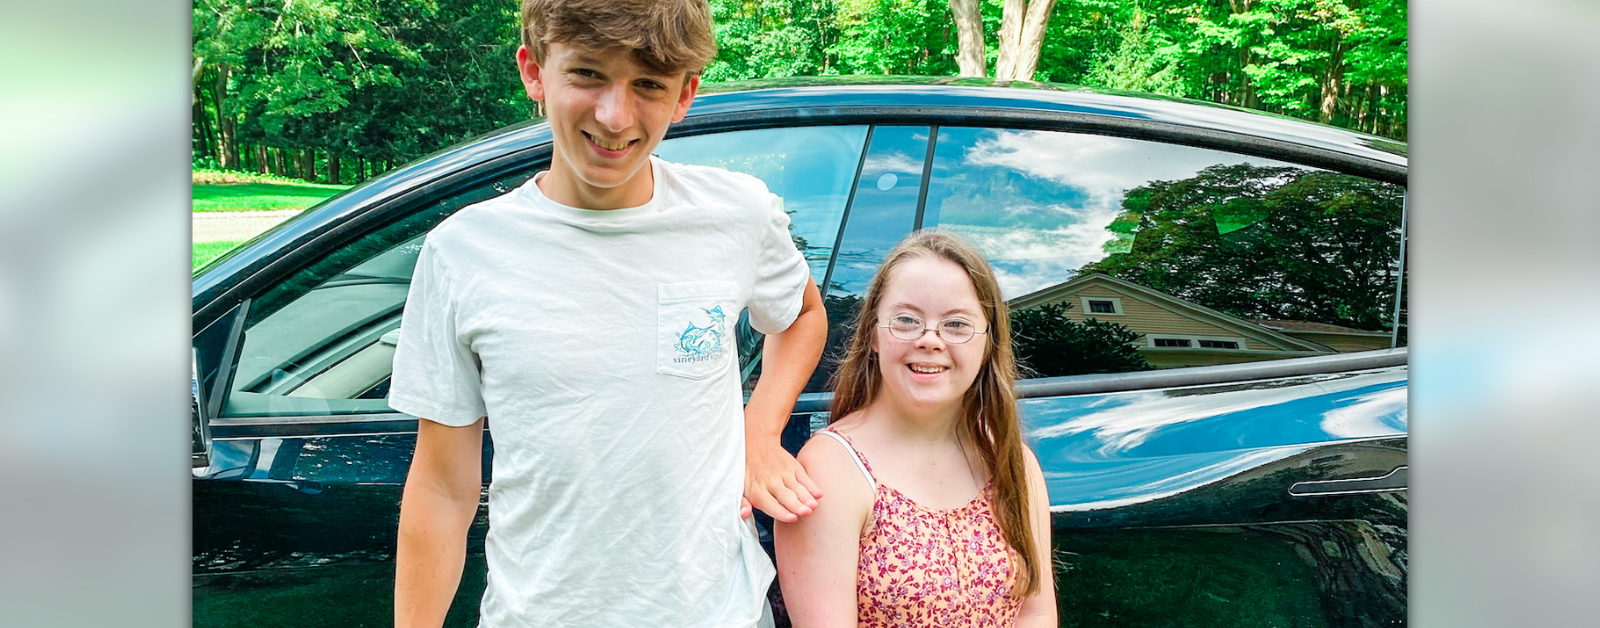 William and Penny stand together in front of a car.